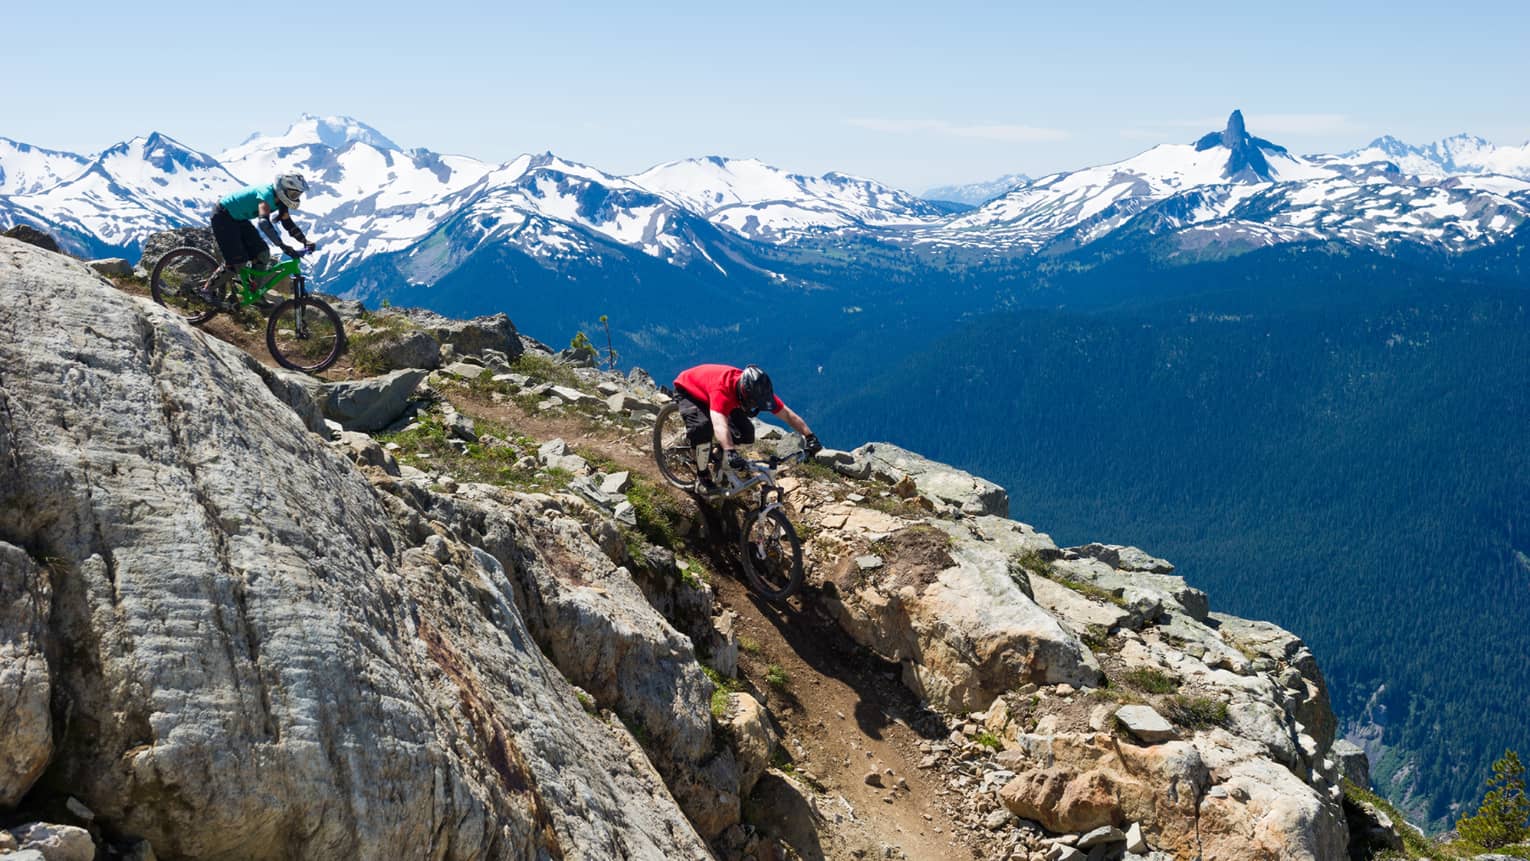 Two people on mountain bikes cycle down rocky mountain near peak, snow caps in background